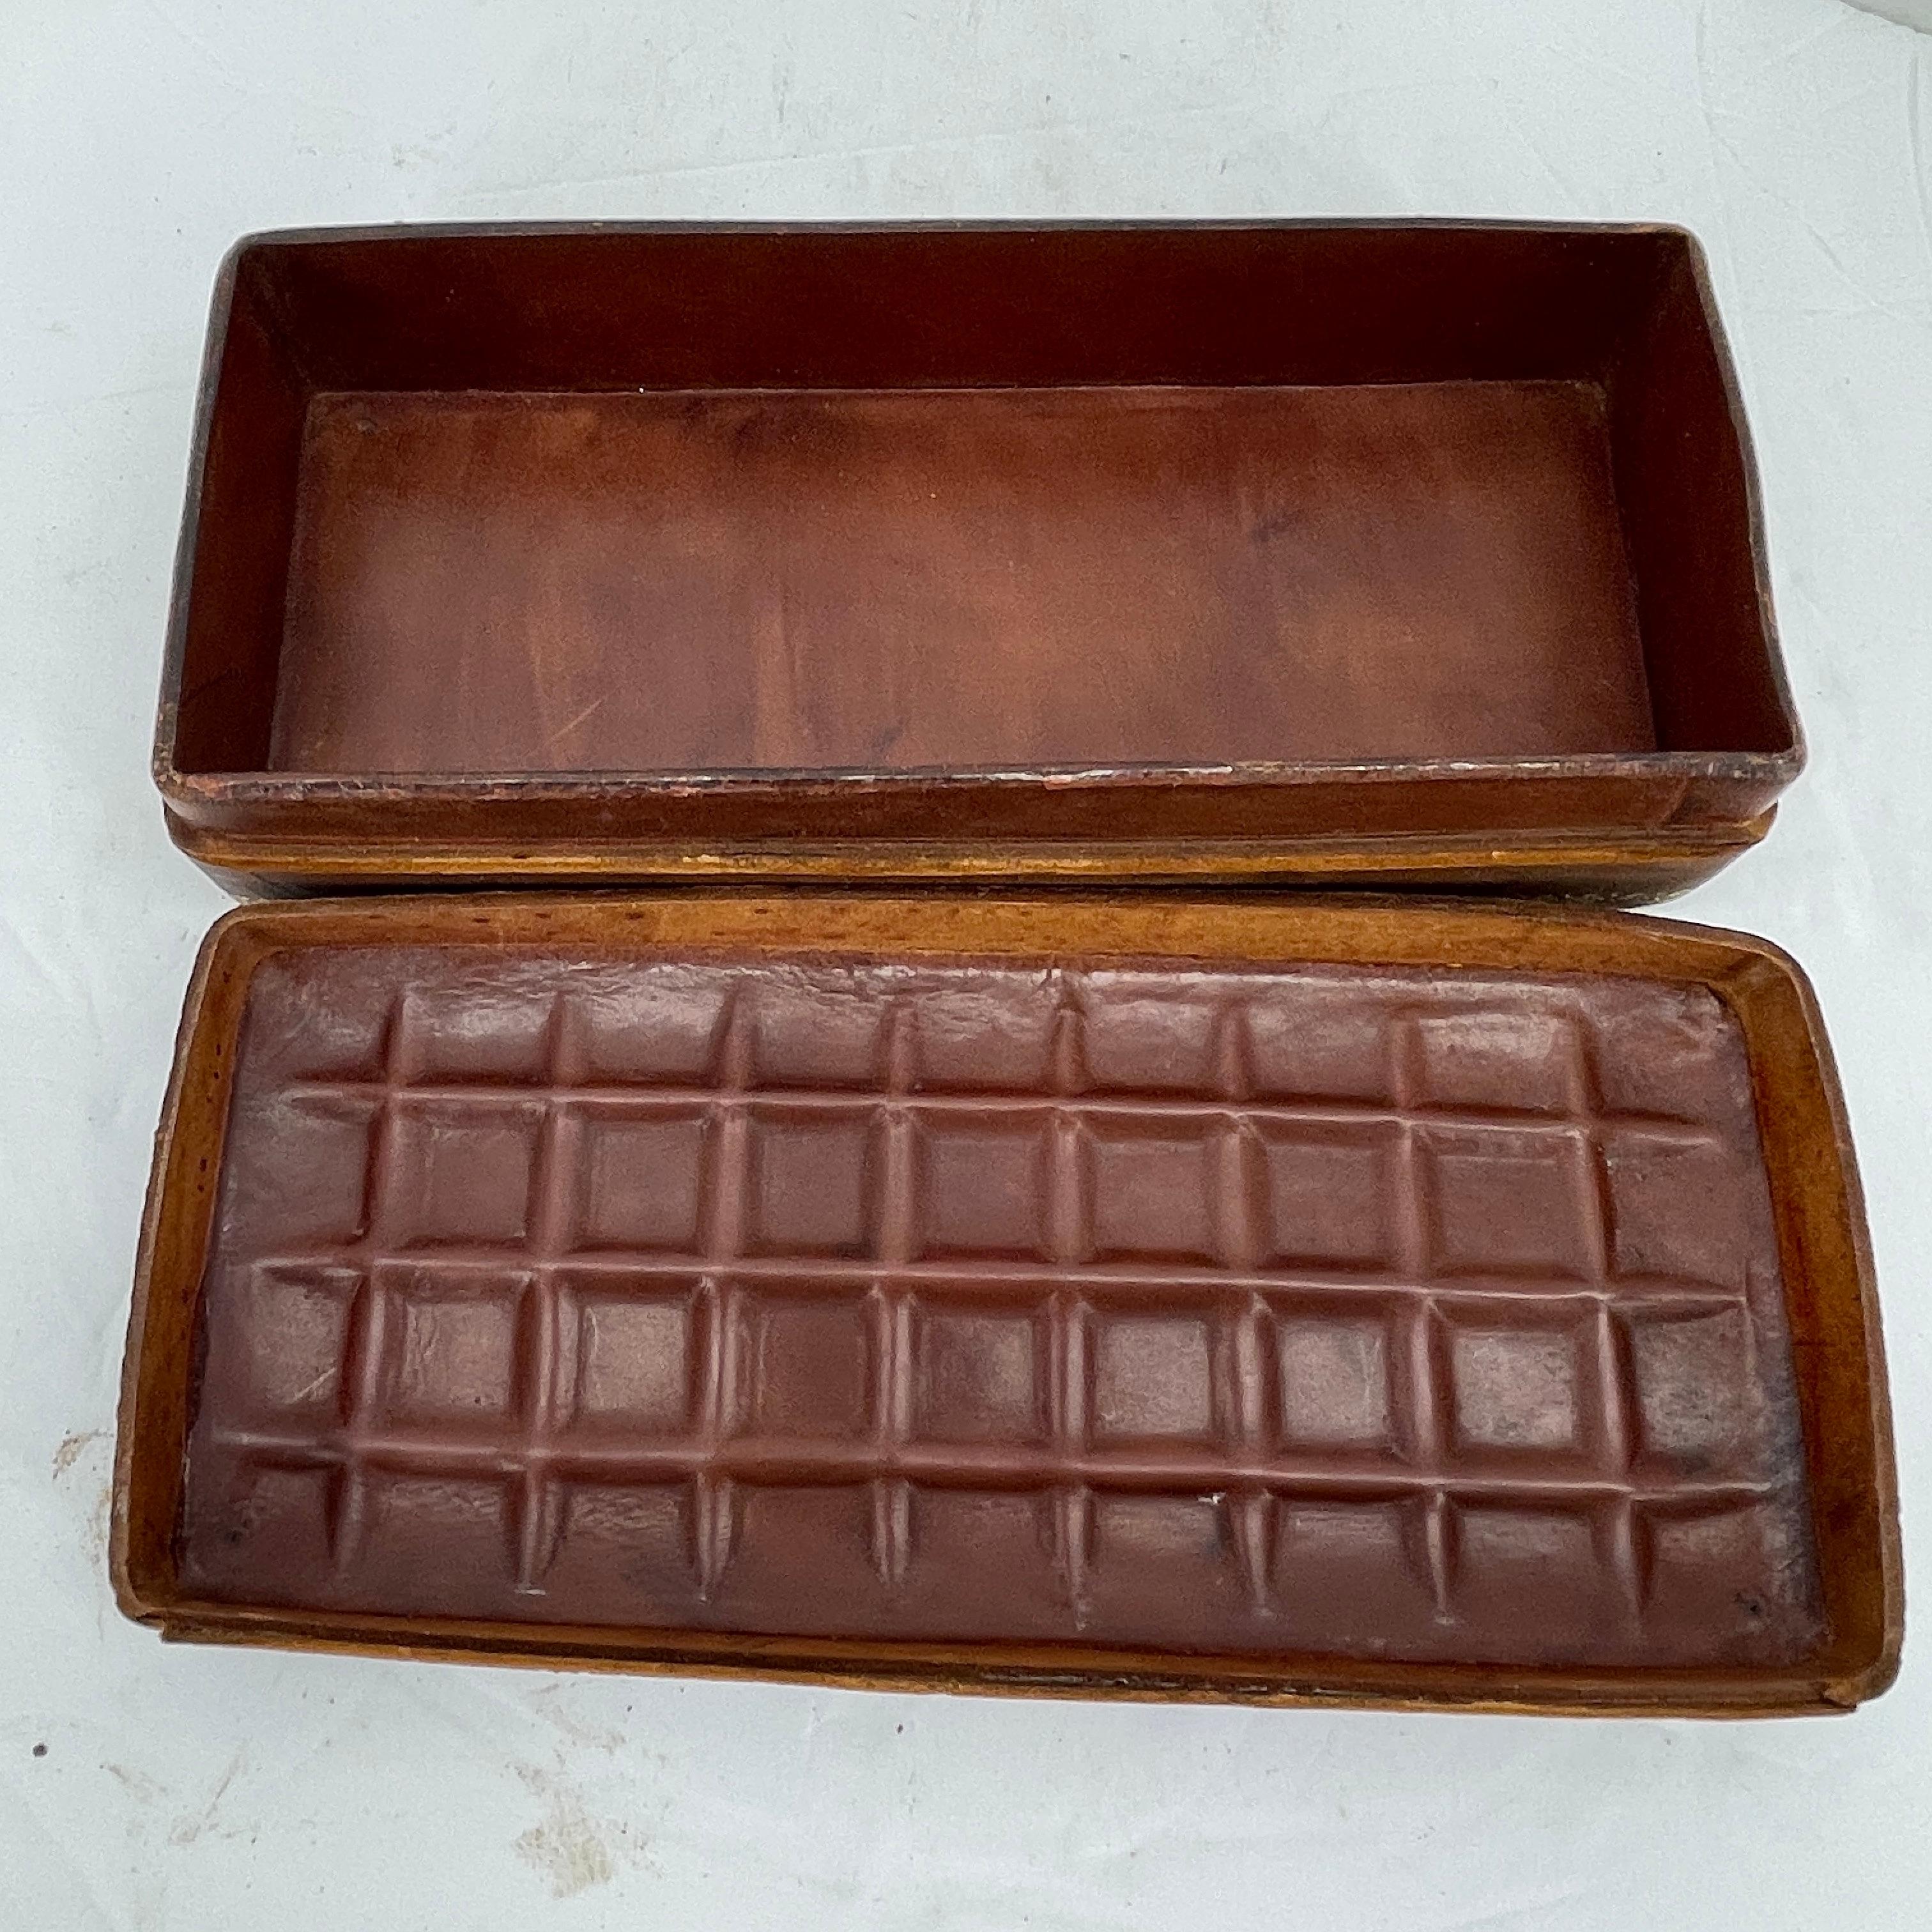 Large Italian Rectangular Red Leather Jewelry Box, Signed Antinori circa 1960s In Good Condition For Sale In Haddonfield, NJ